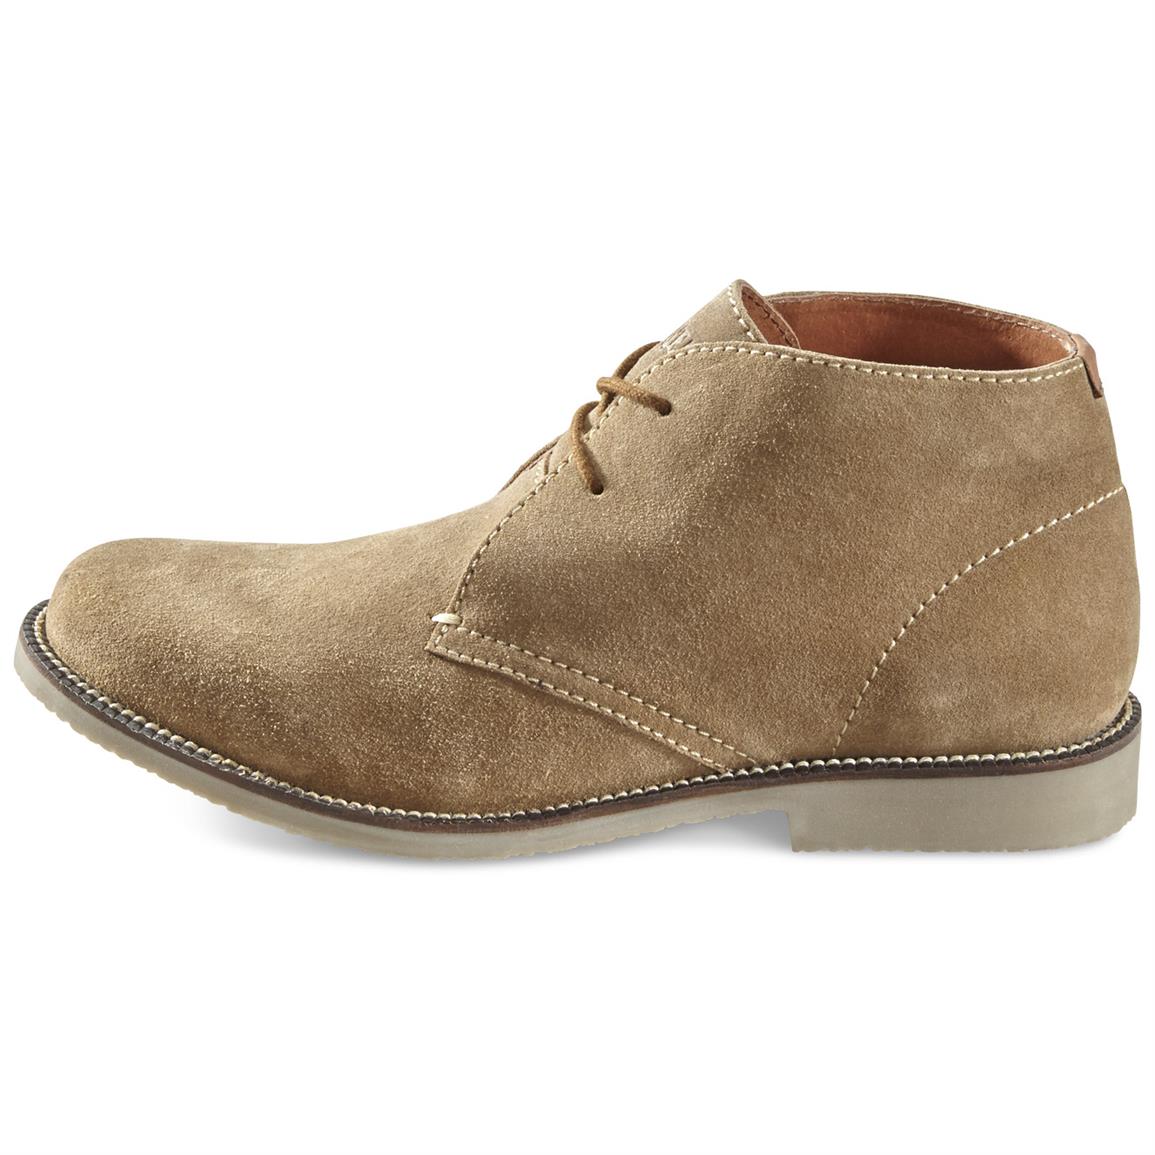 Guide Gear Men's Desert Boots - 668002, Casual Shoes at Sportsman's Guide